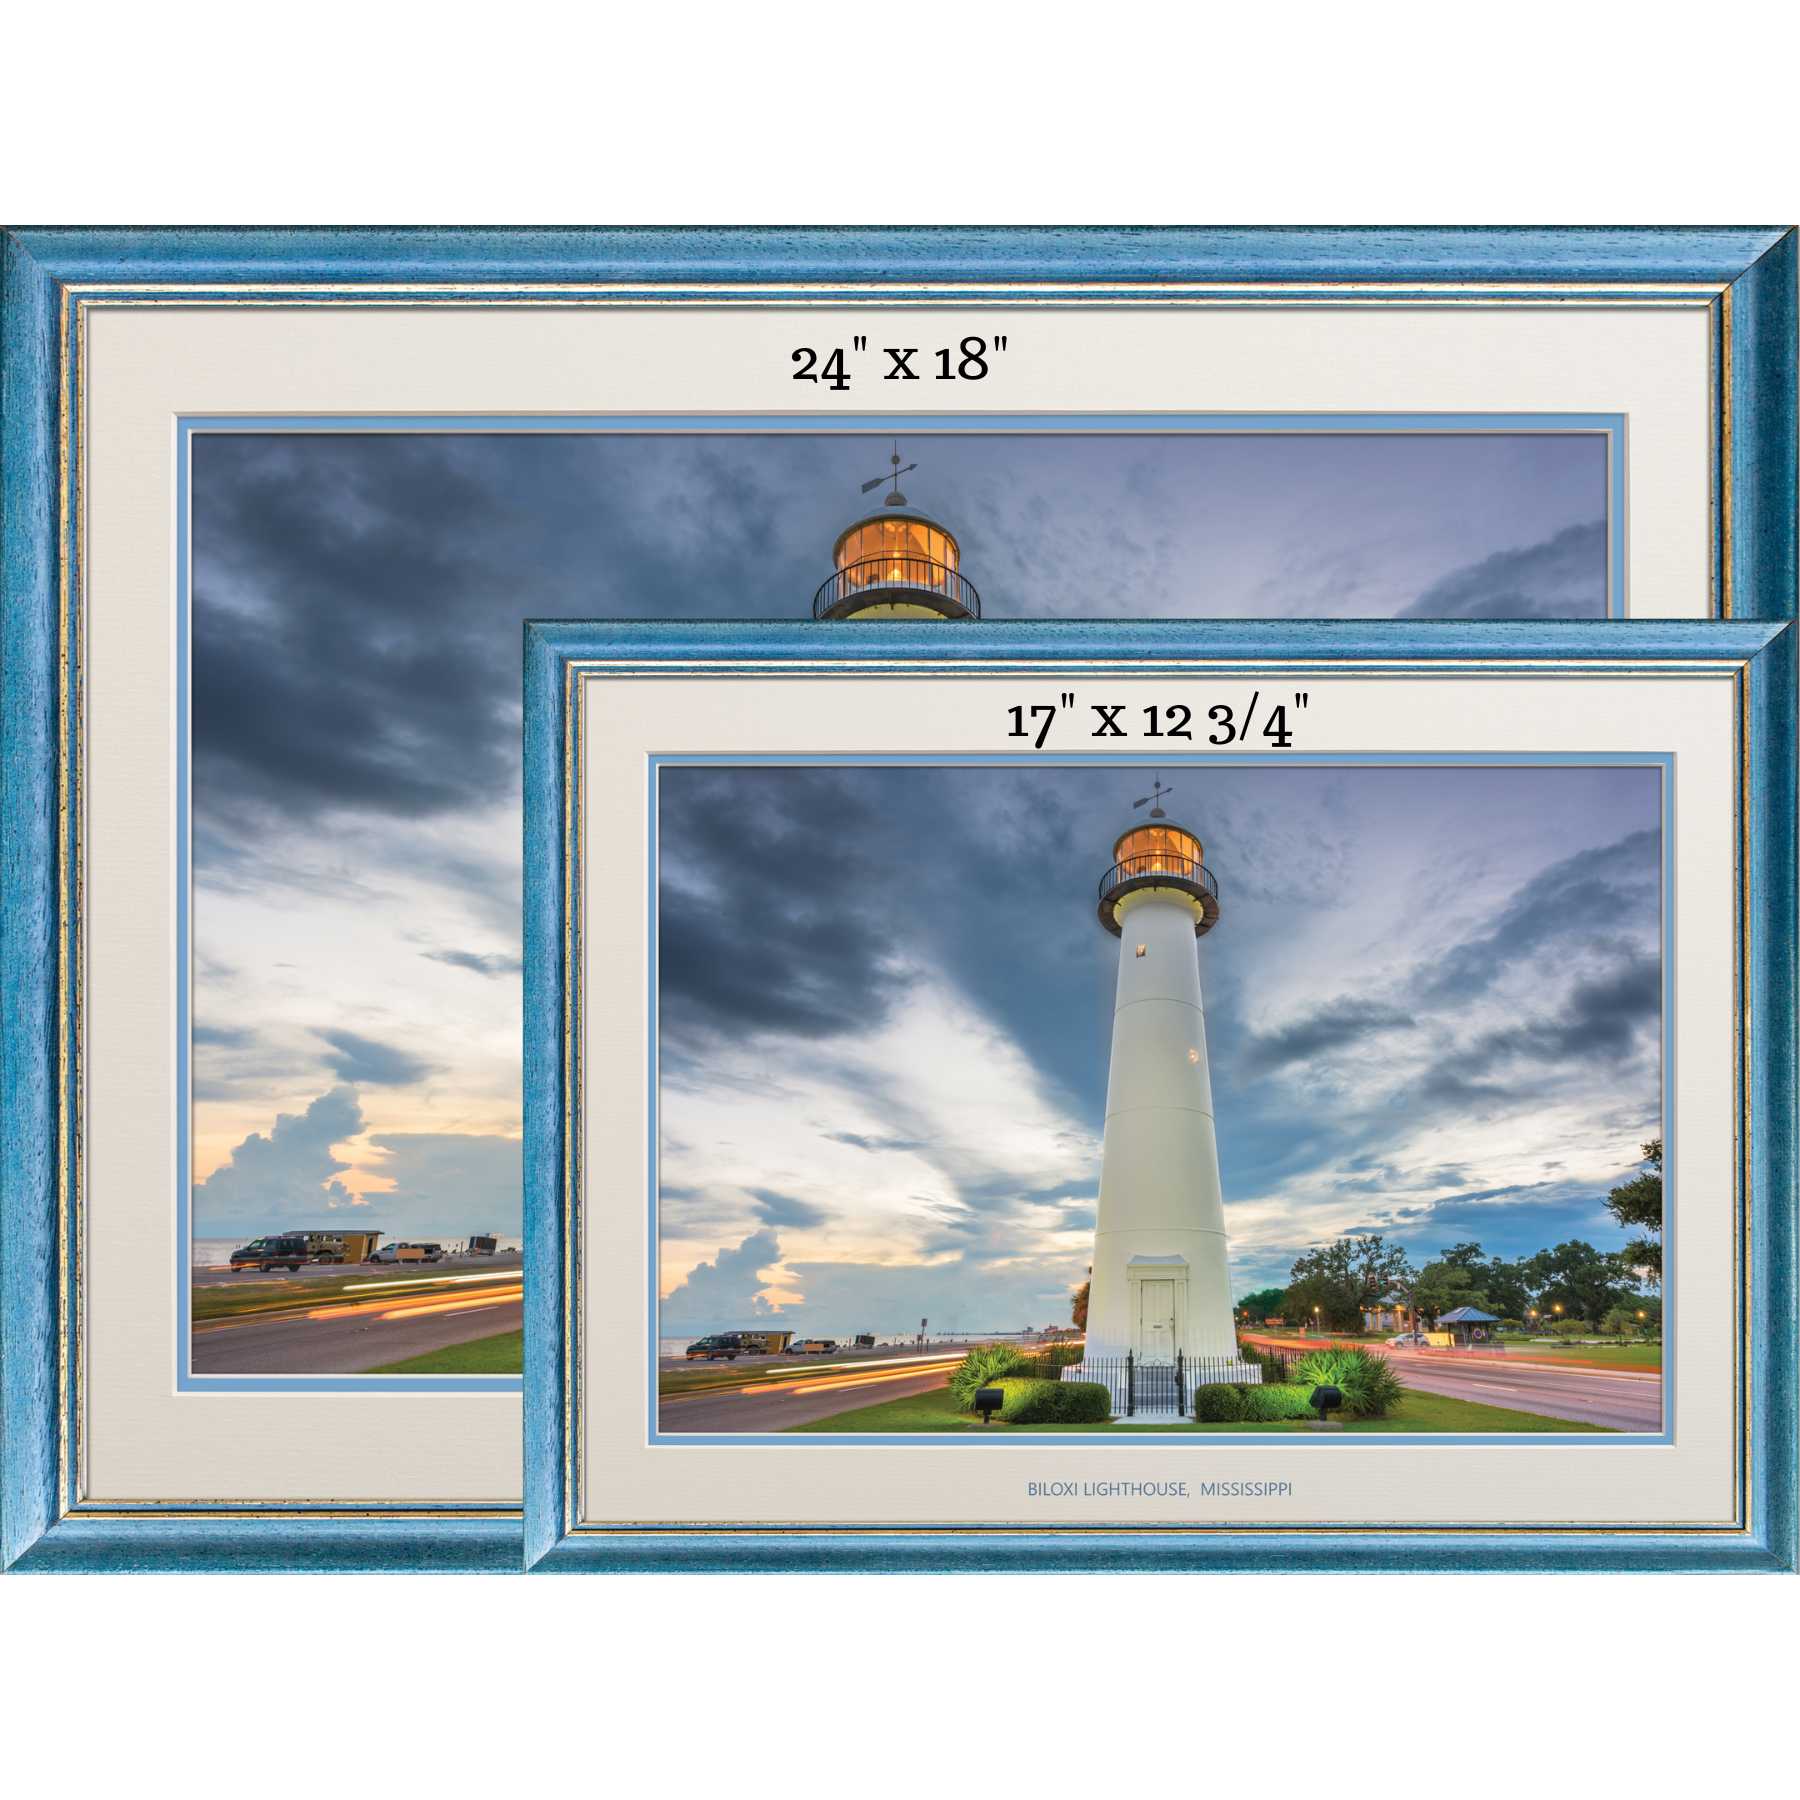 Biloxi Lighthouse Poster - Moveable and removeable!